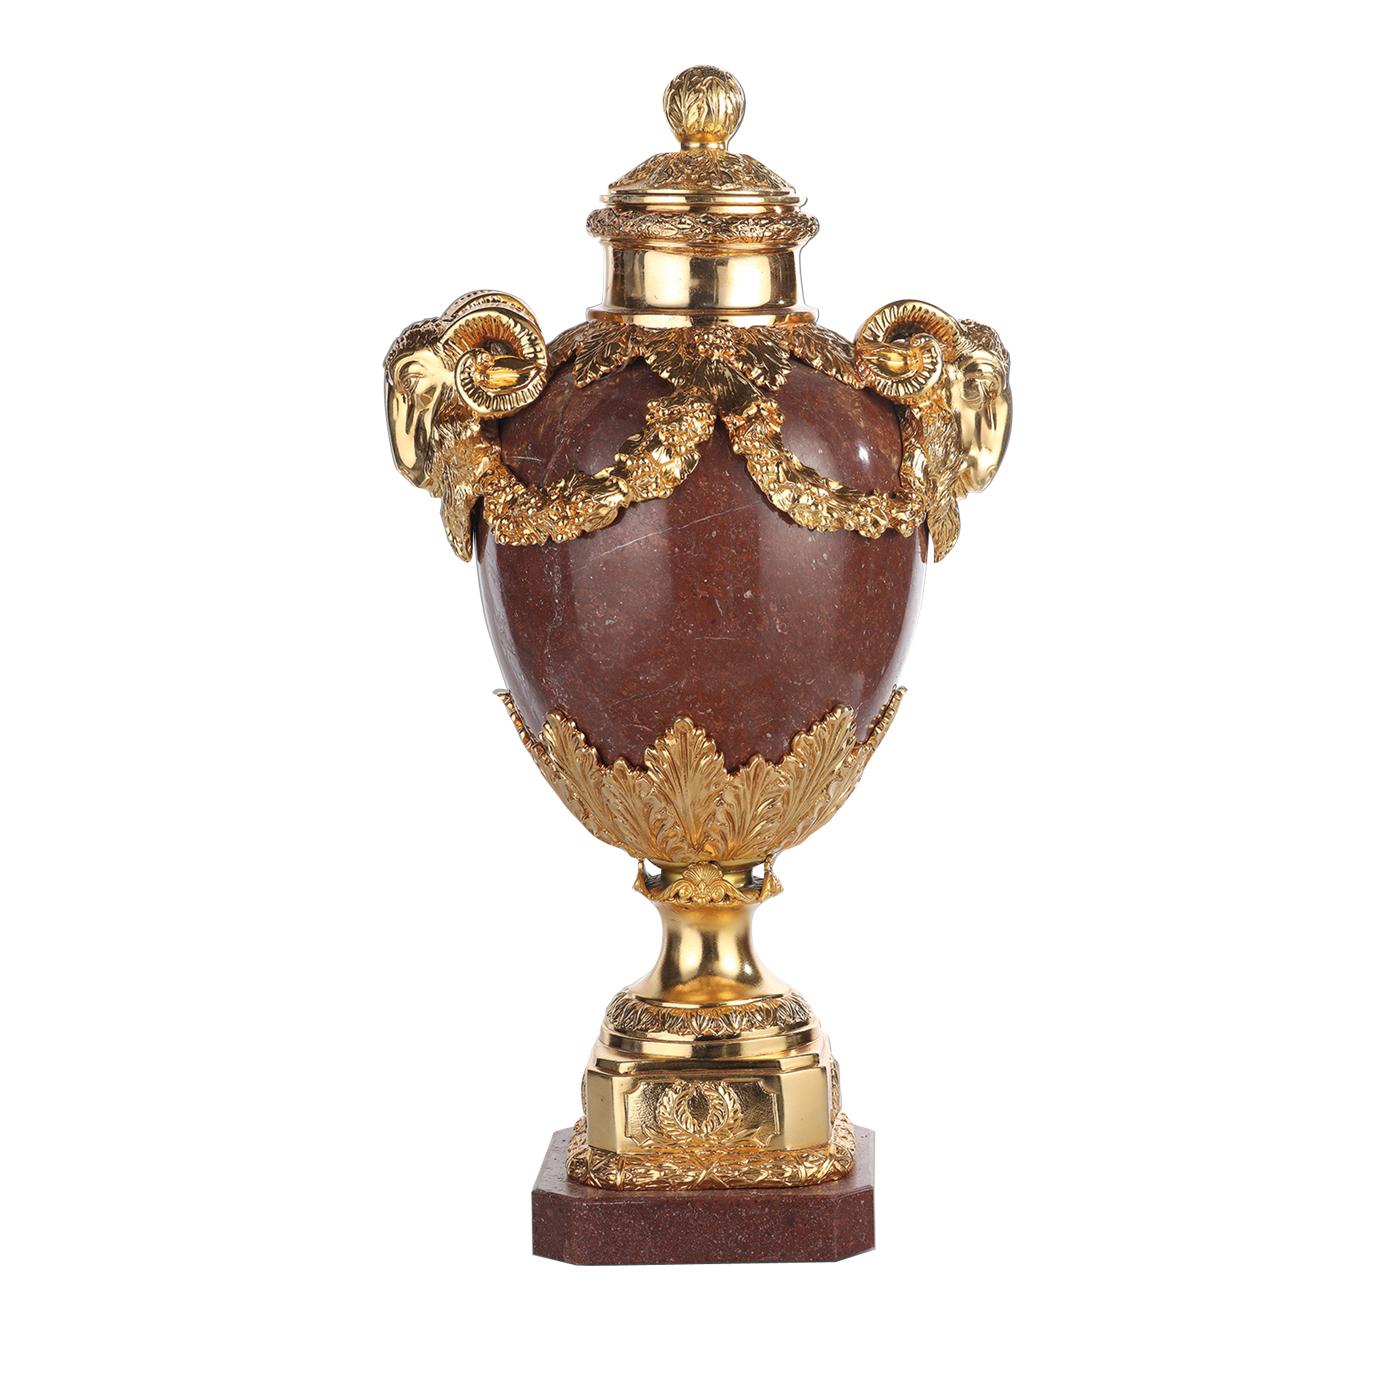 This exquisite vase with lid brings Classic elegance to any décor, thanks to its elegant shapes and decorations and the use of precious materials. The square base and the main body of the piece are in marble, while the accents, including the lid and